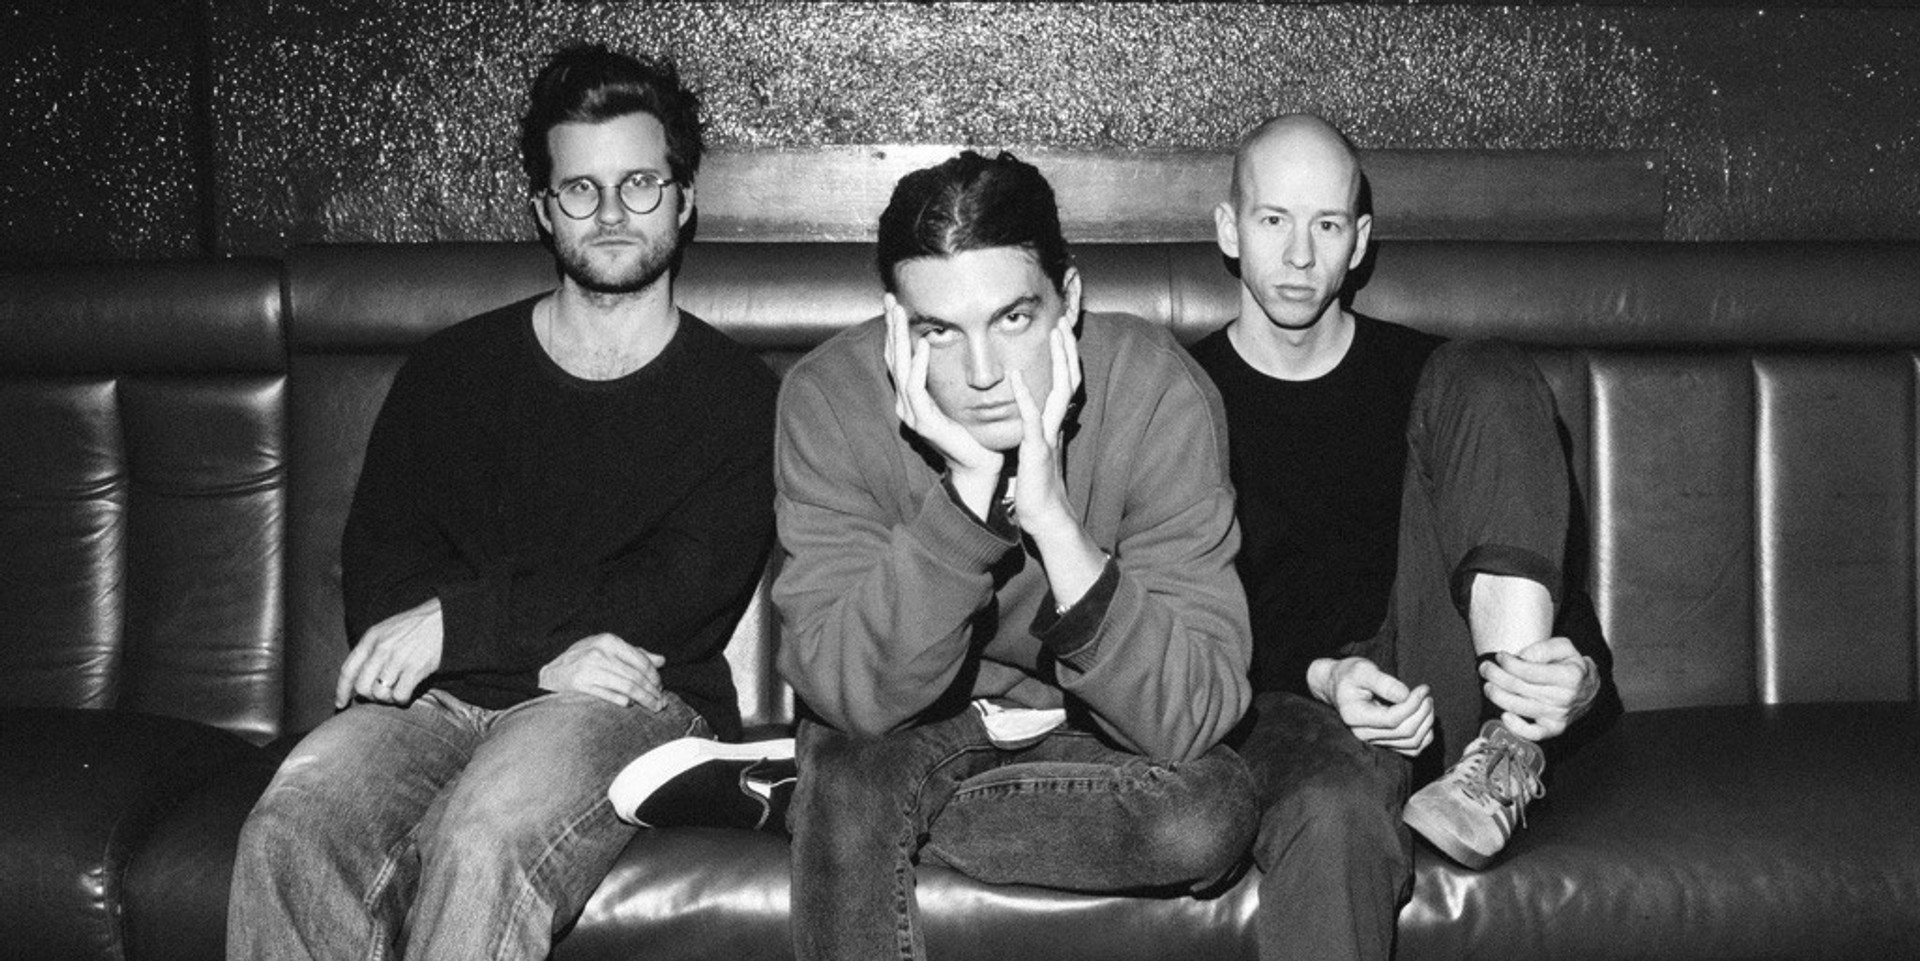 LANY are returning to Manila for their first headlining concert